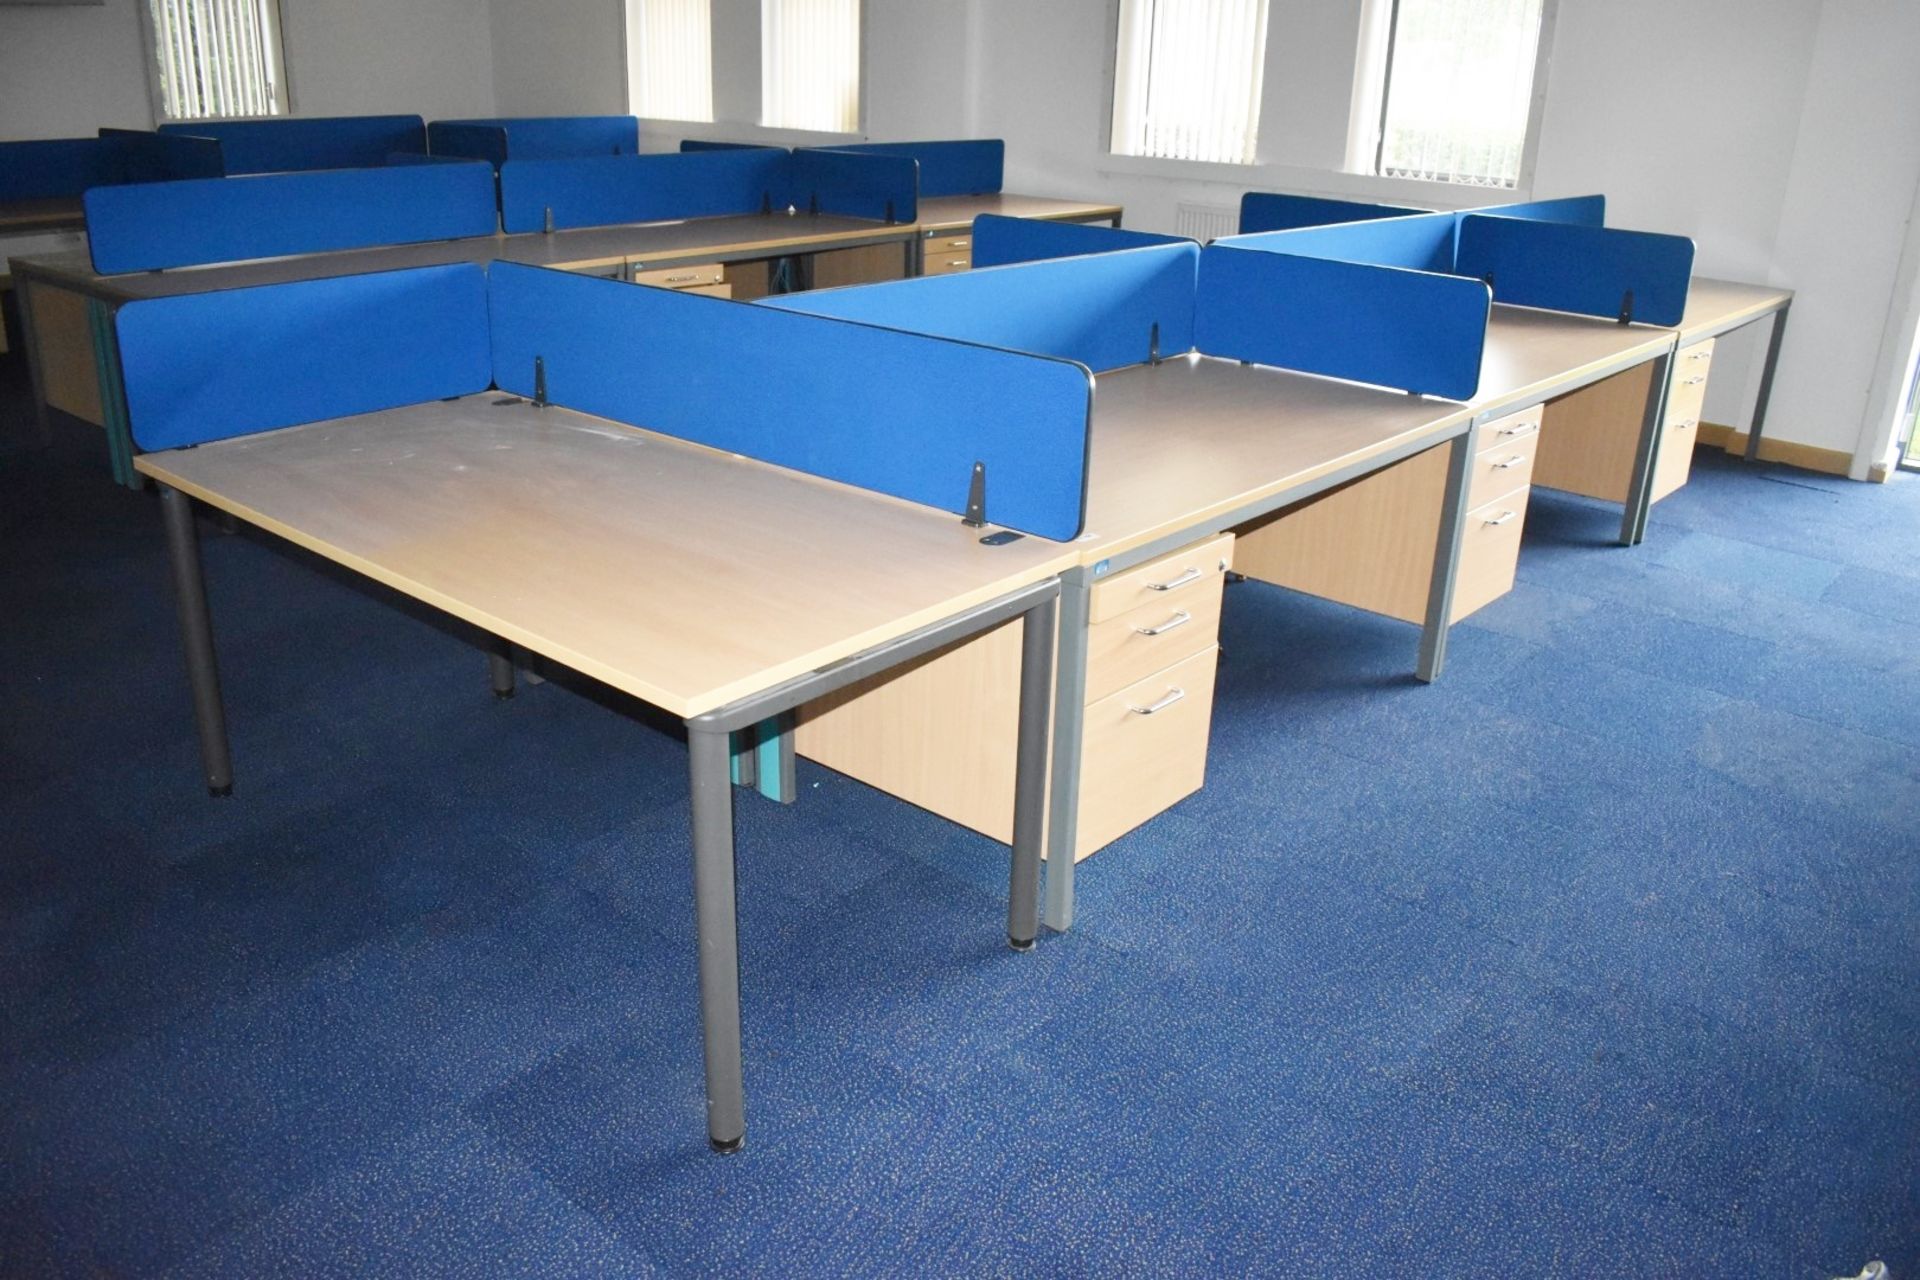 7 x Beech Office Desks With Integrated Drawer Pedestals and Privacy Partitions - Size of Each Desk